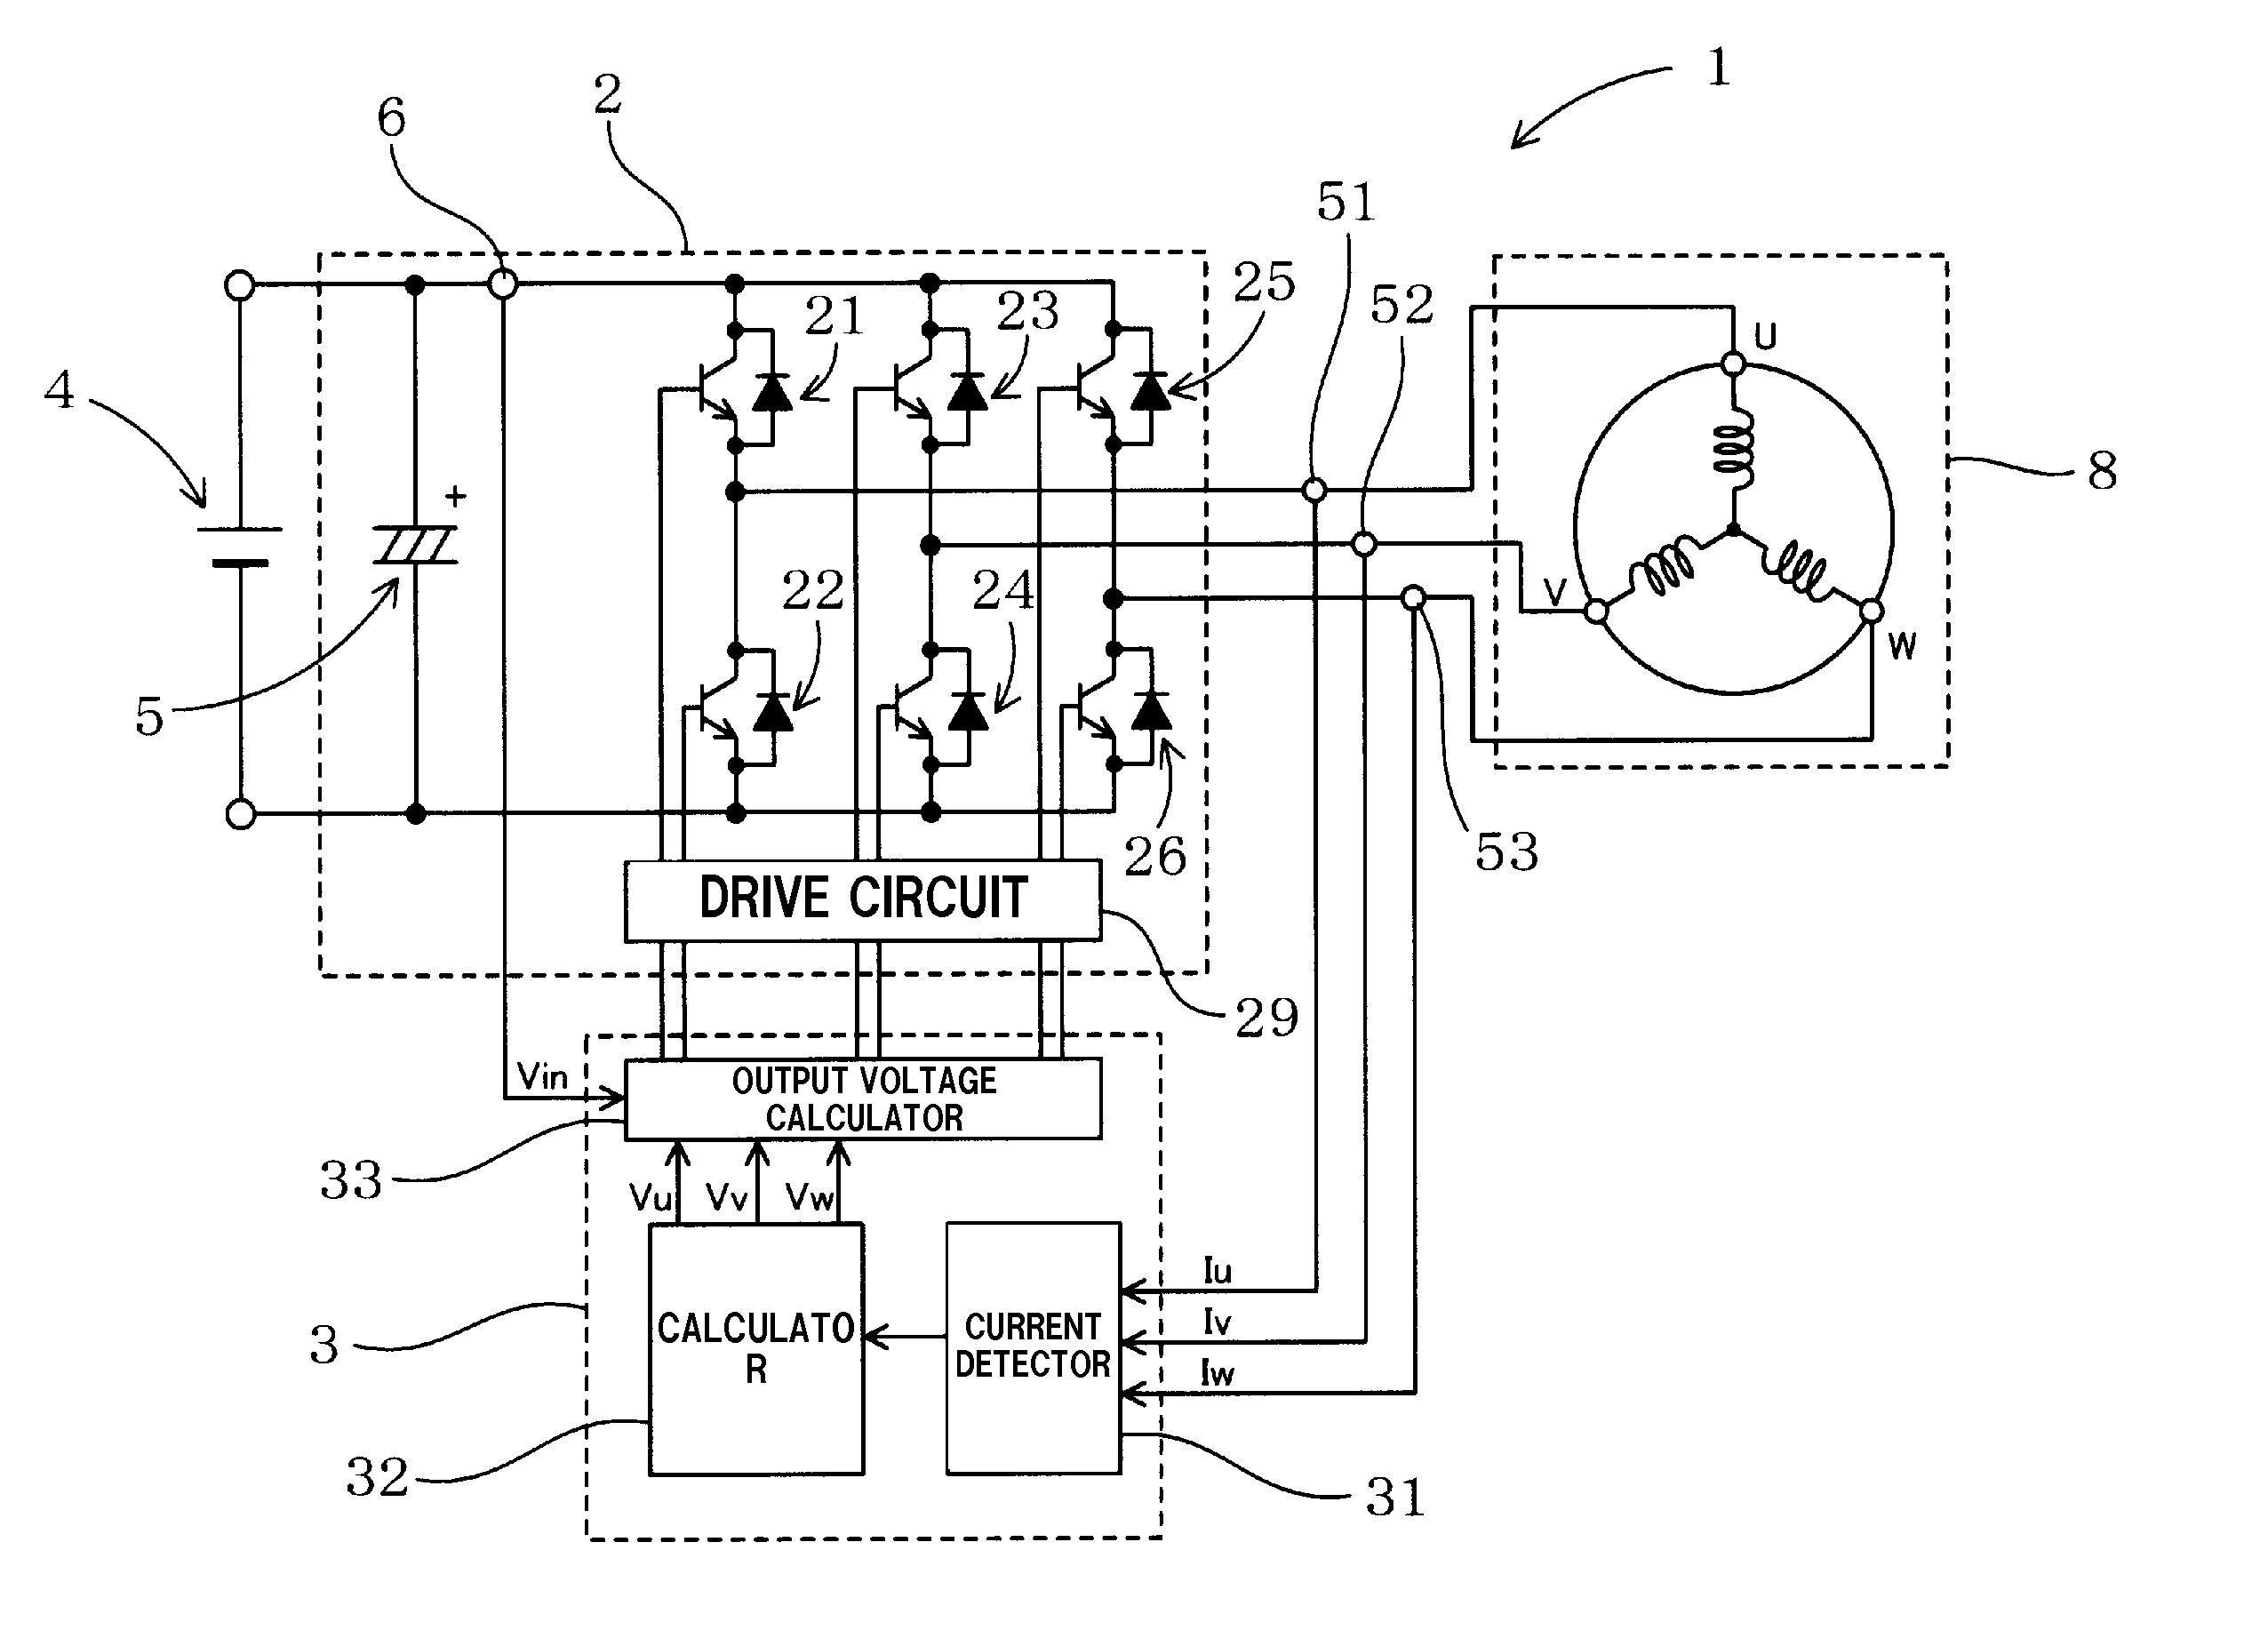 Method for detecting deterioration of permanent magnet in electric motor and system for the method